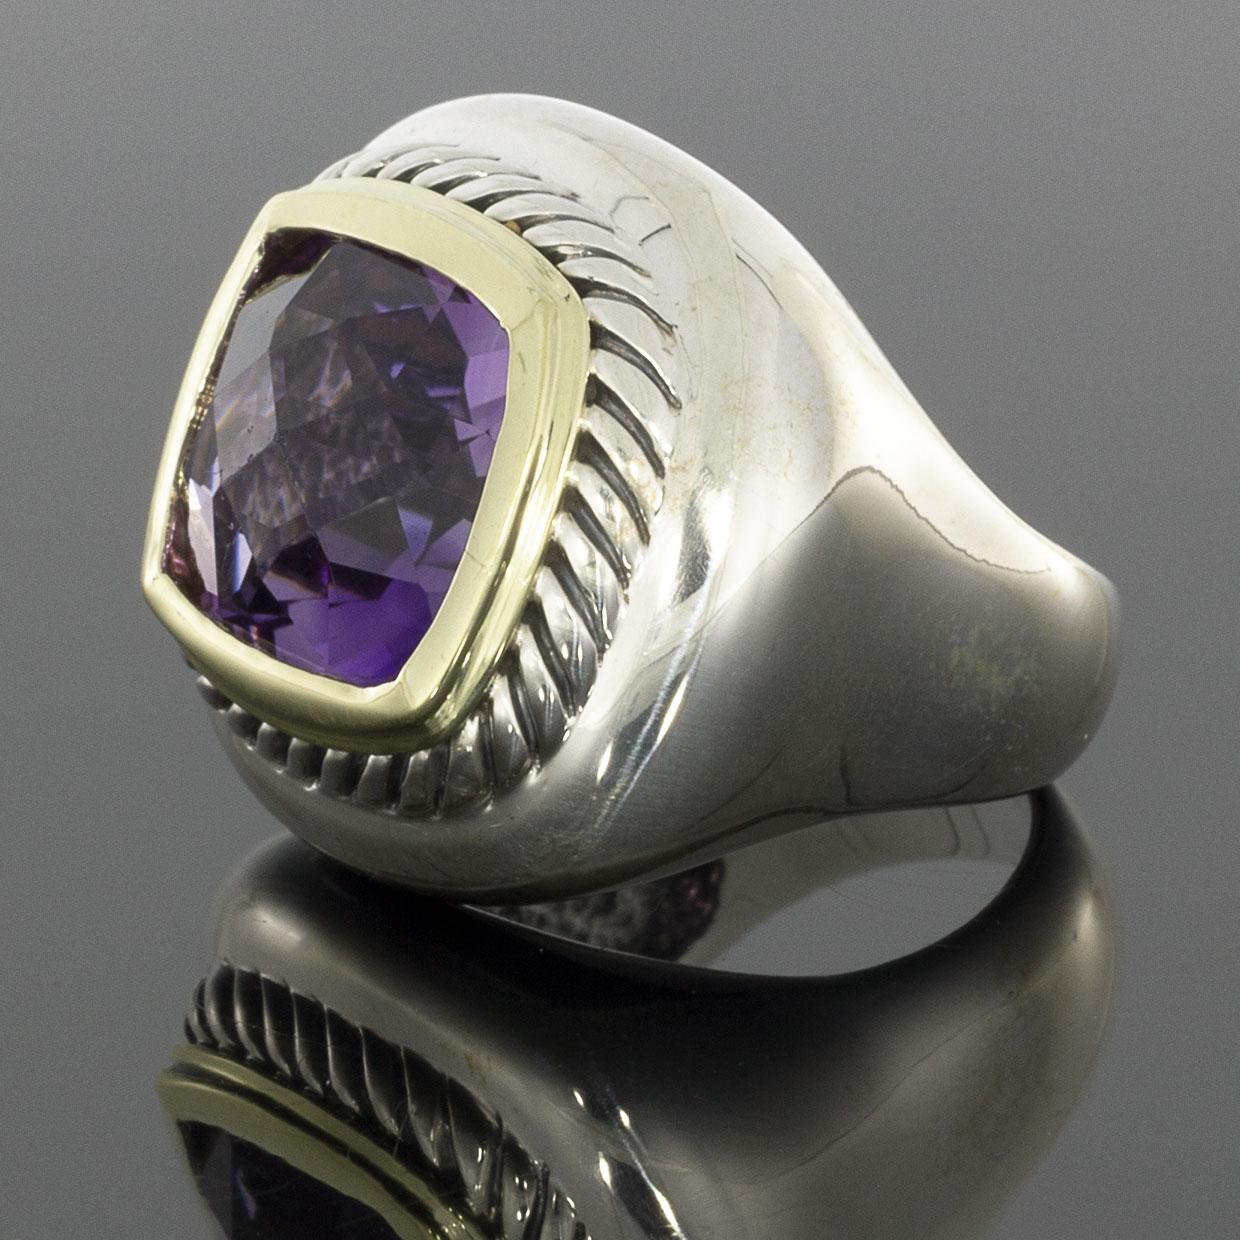 Item Details:
Estimated Retail - $1,350.00
Brand - David Yurman
Collection - Albion
Metal - 14 Karat Yellow Gold & 925 Sterling Silver
Style - Cocktail Ring
Ring Size - 6.50
Sizable - Yes
Width - 5.35 mm
Colored Stone Color - Purple

Stone 1